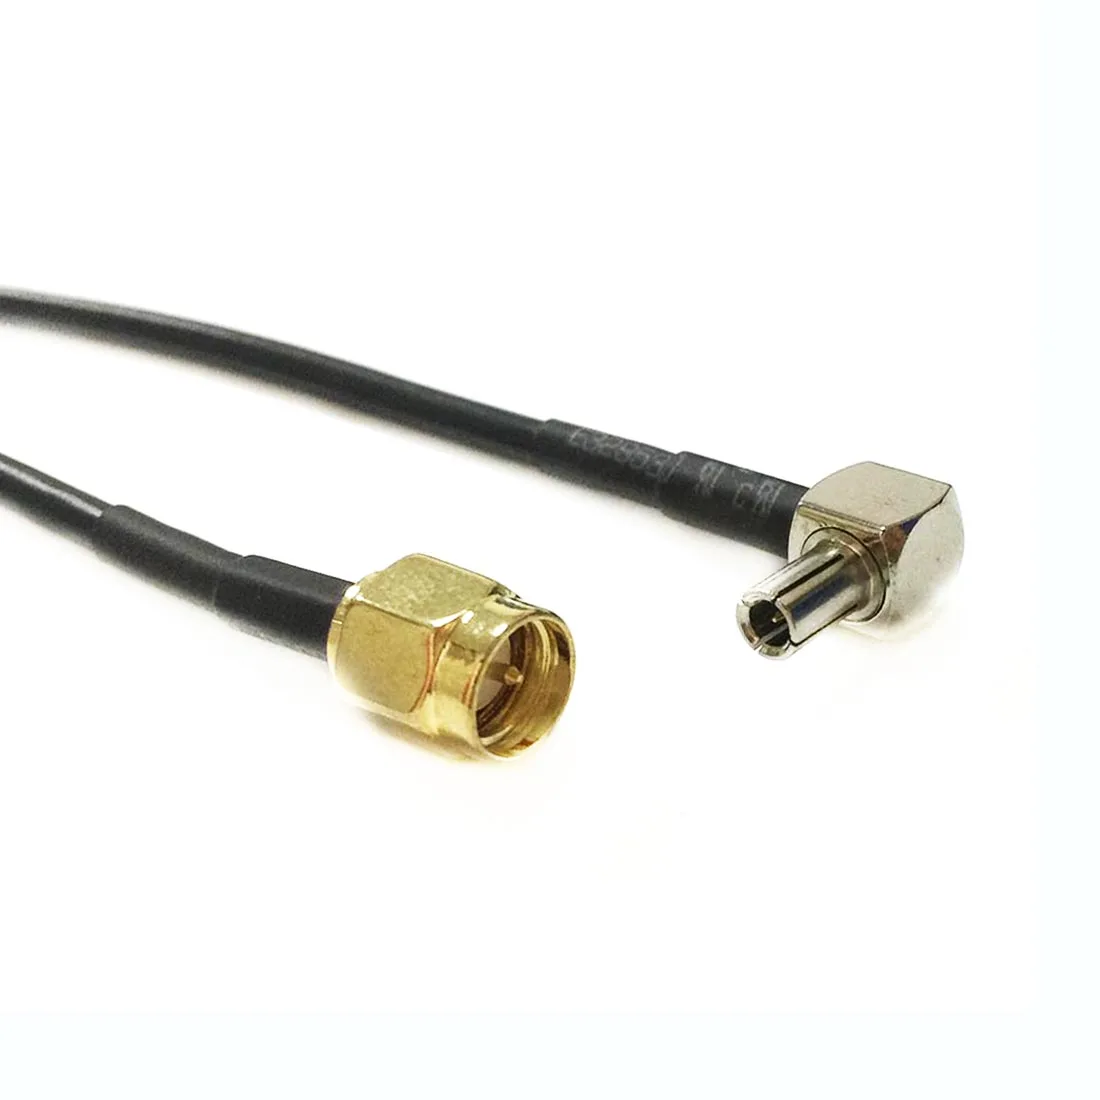 

3G Antenna Cable SMA Male Plug Switch TS9 Right Angle RG174 Cable 20cm 8" Wholesale Fast Ship New